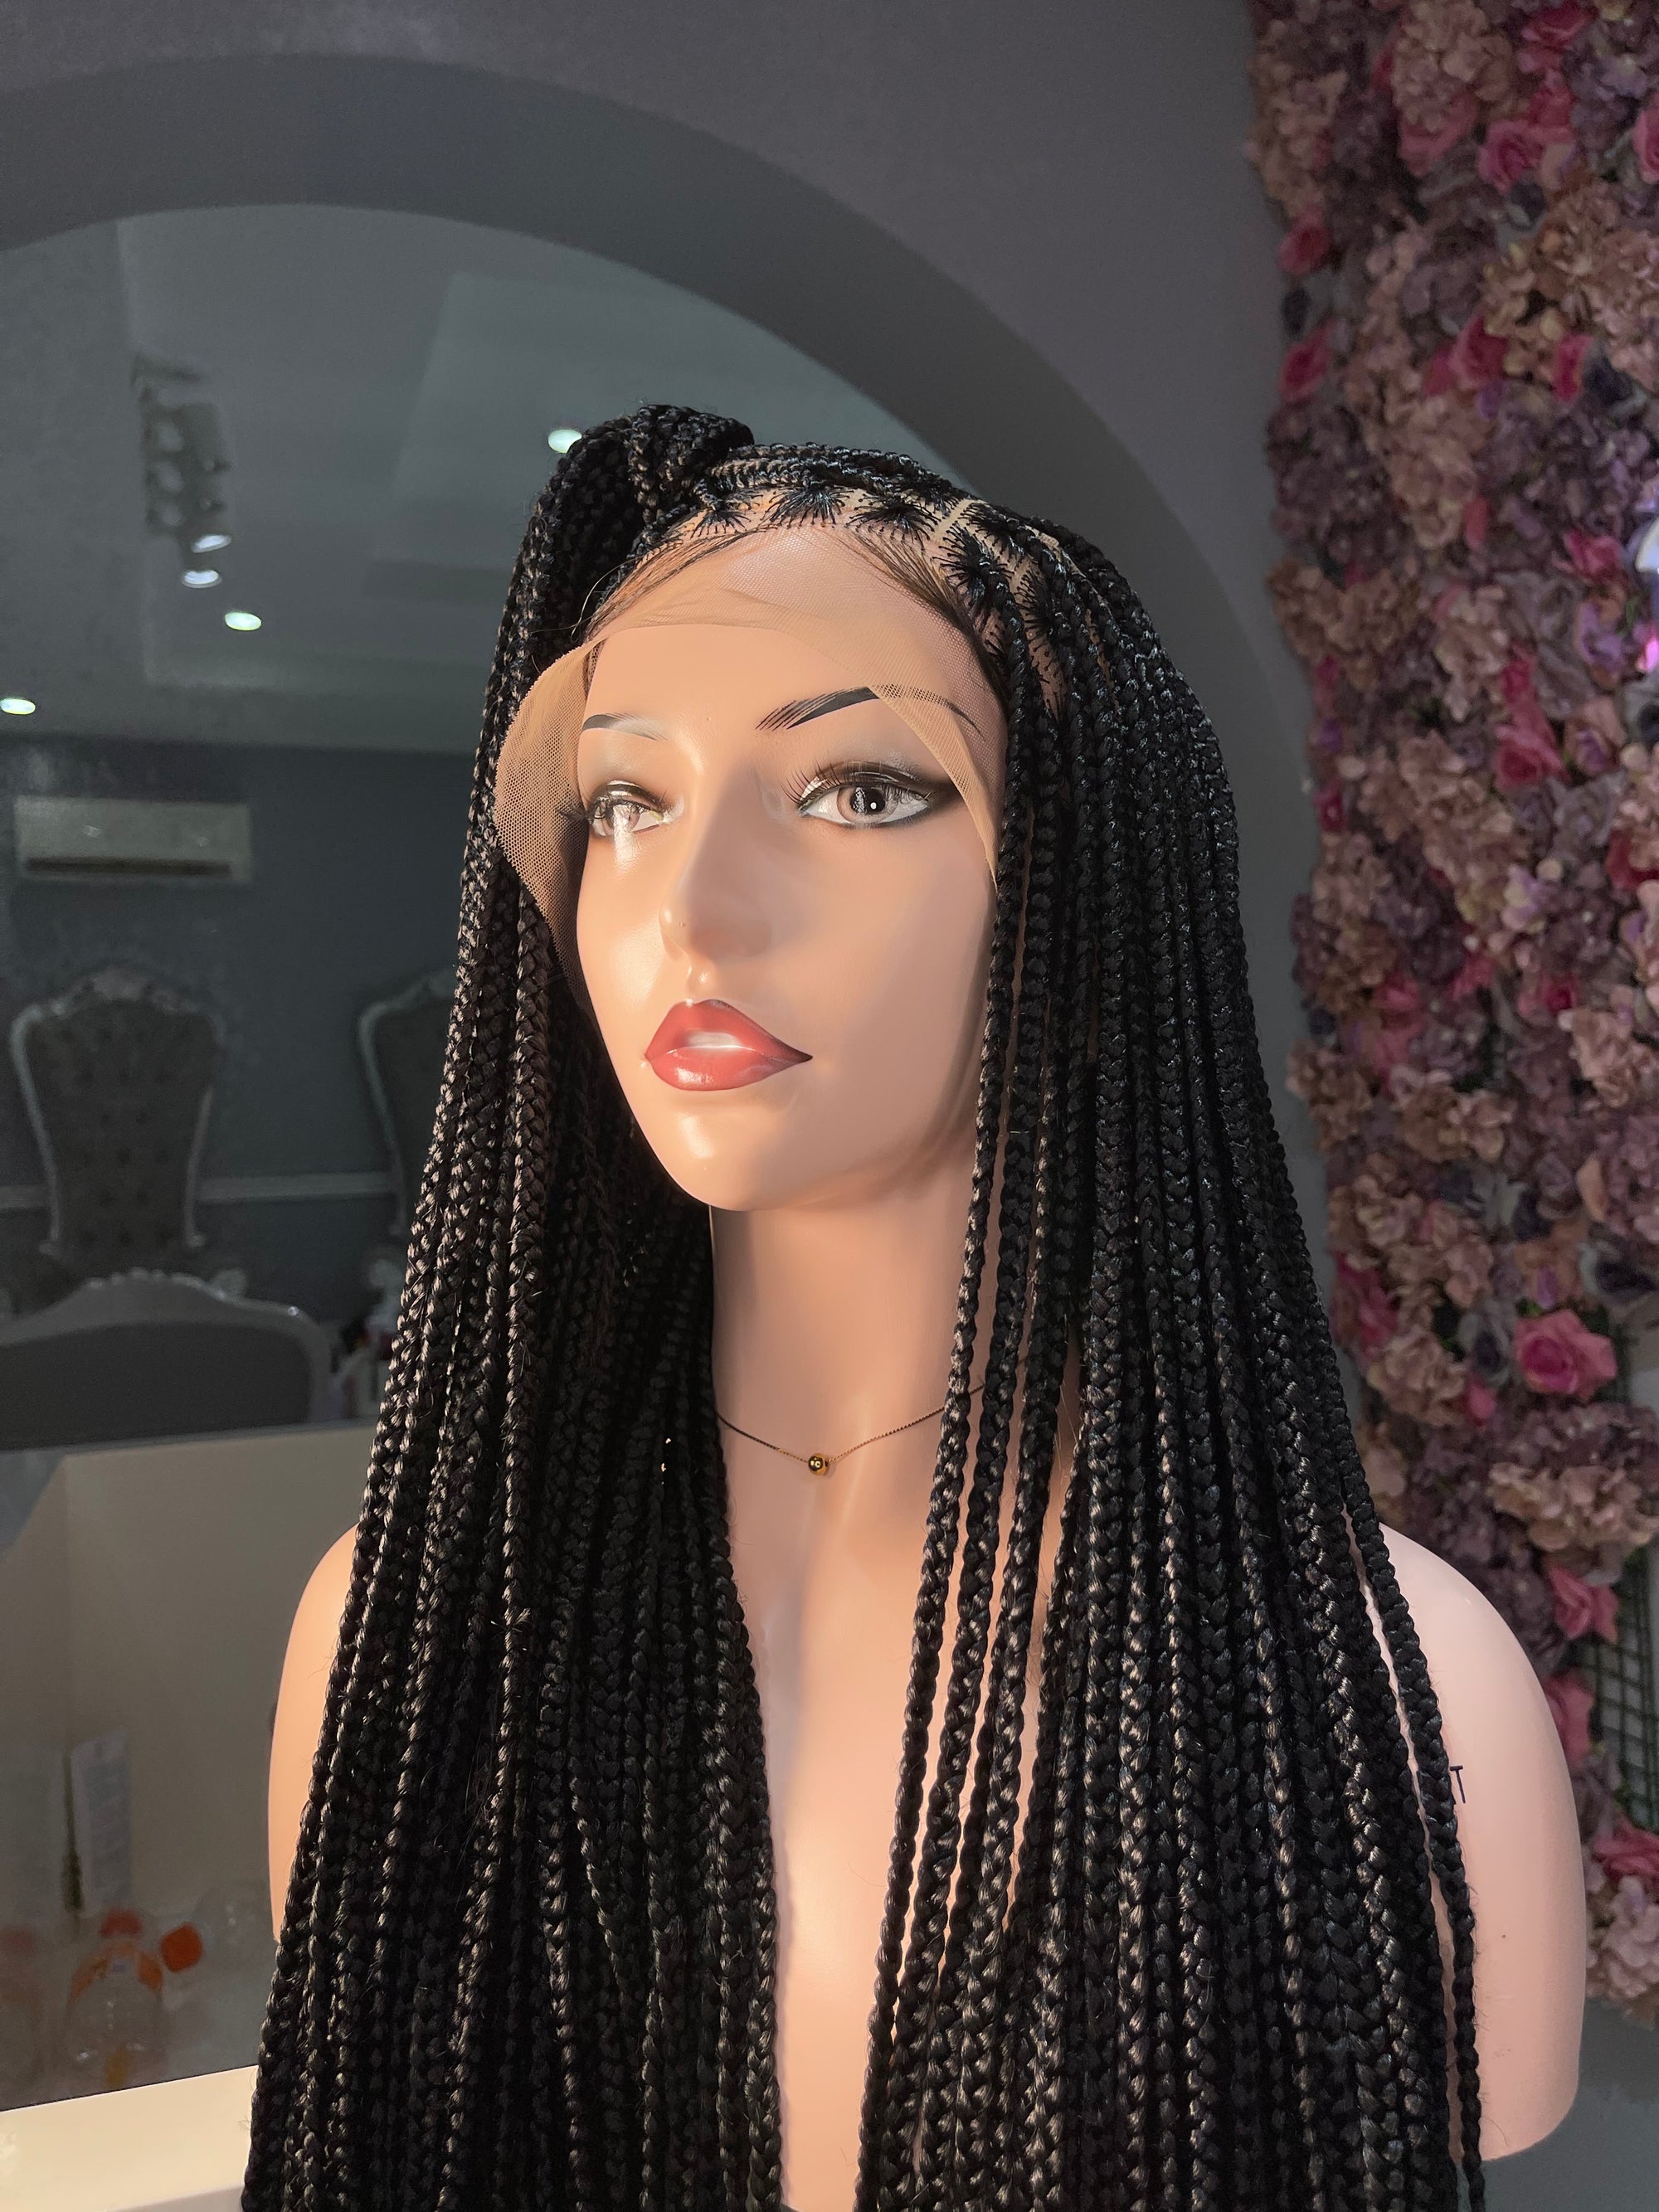 Braided wig: Premium 24 Knotless Braid Wig with Full Lace and